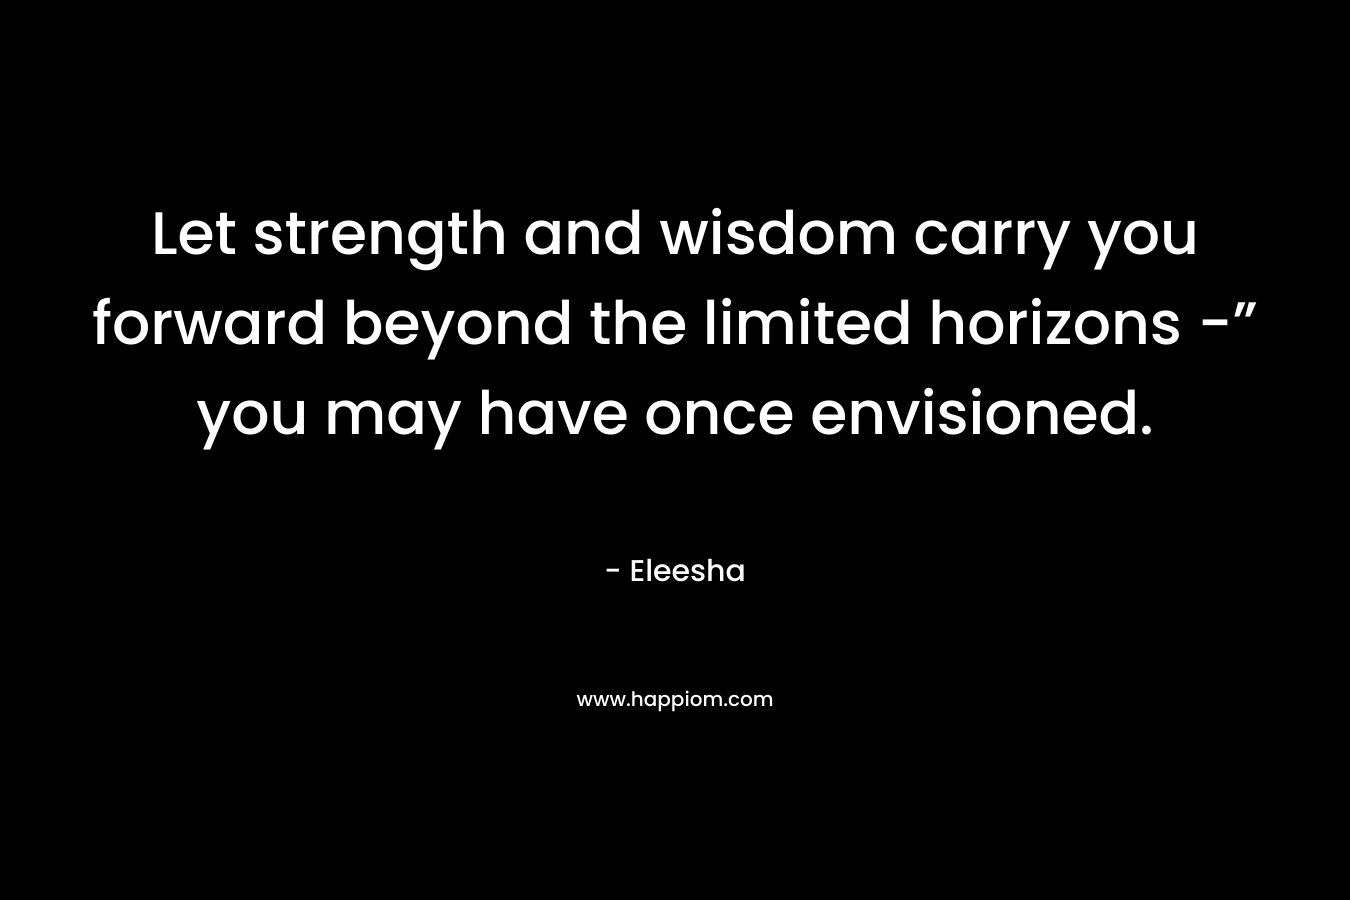 Let strength and wisdom carry you forward beyond the limited horizons -” you may have once envisioned.